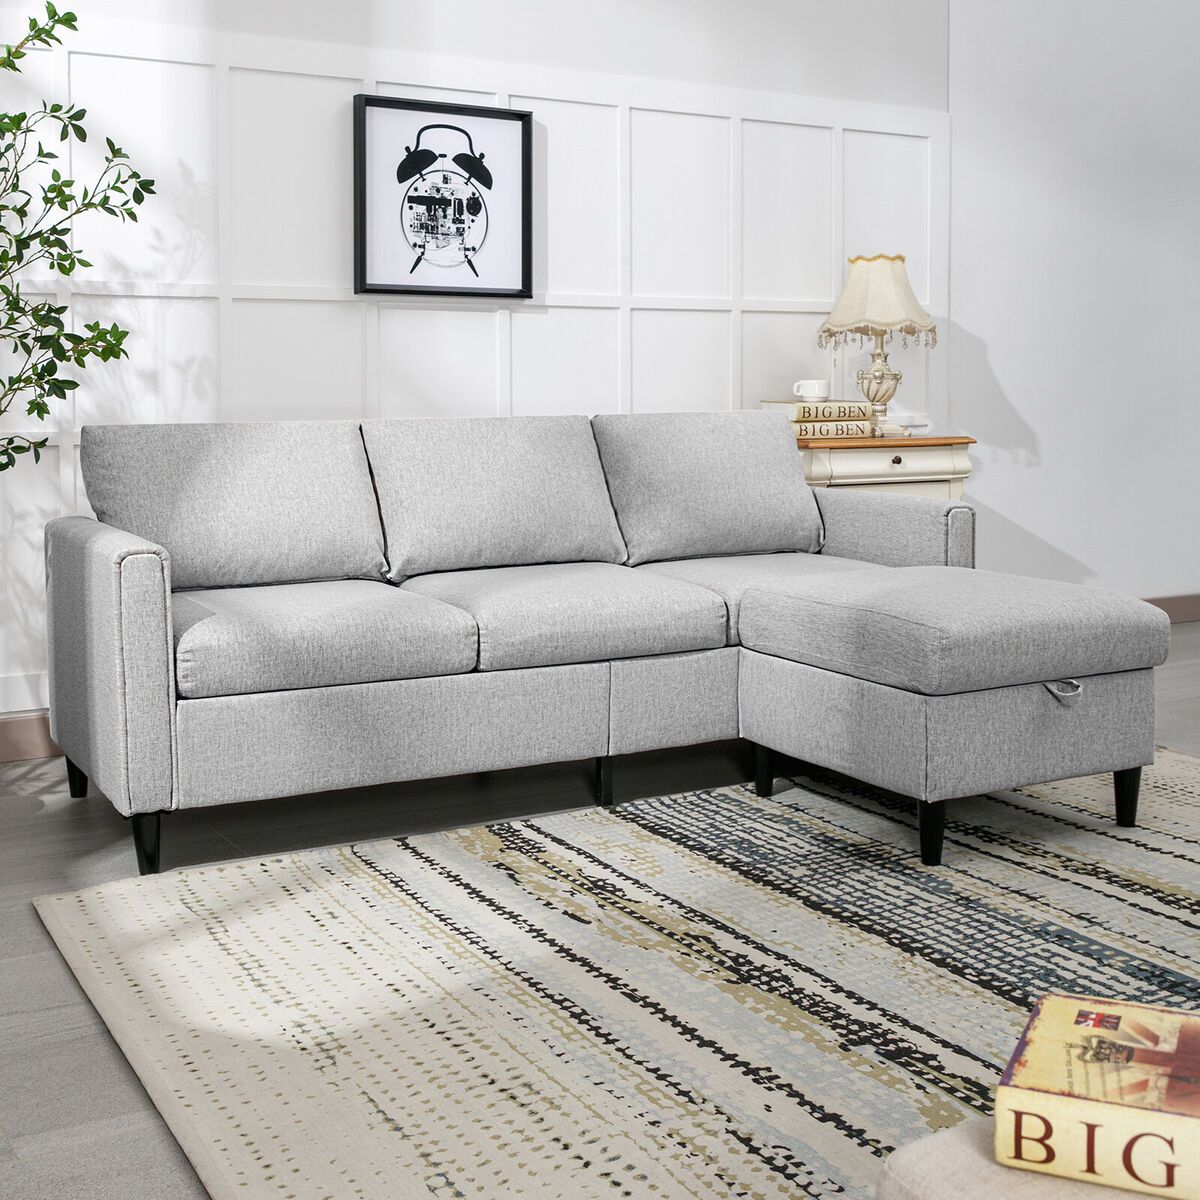 Convertible Sectional Sofa Couch, 77"l Shaped Sofa With Storage Ottoman |  Ebay In Convertible L Shaped Sectional Sofas (View 2 of 24)